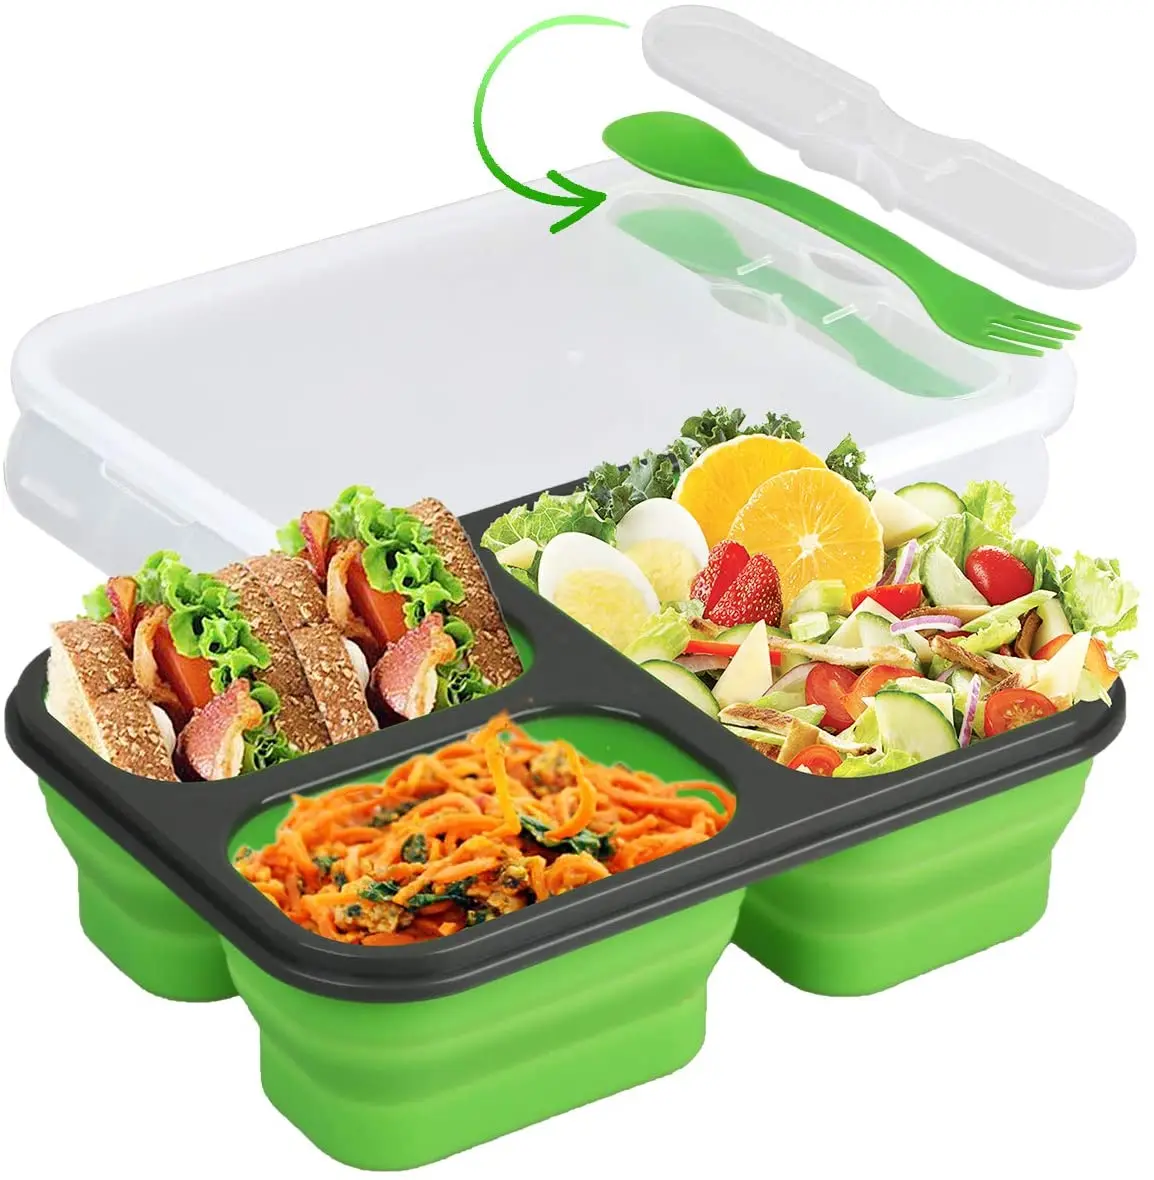 

BPA Free 3 Cavities Silicone Collapsible Lunch Bento Box,Safe in Microwave,Dishwasher,Freezer, Purple,pink,blue,yellow,red,green,orange